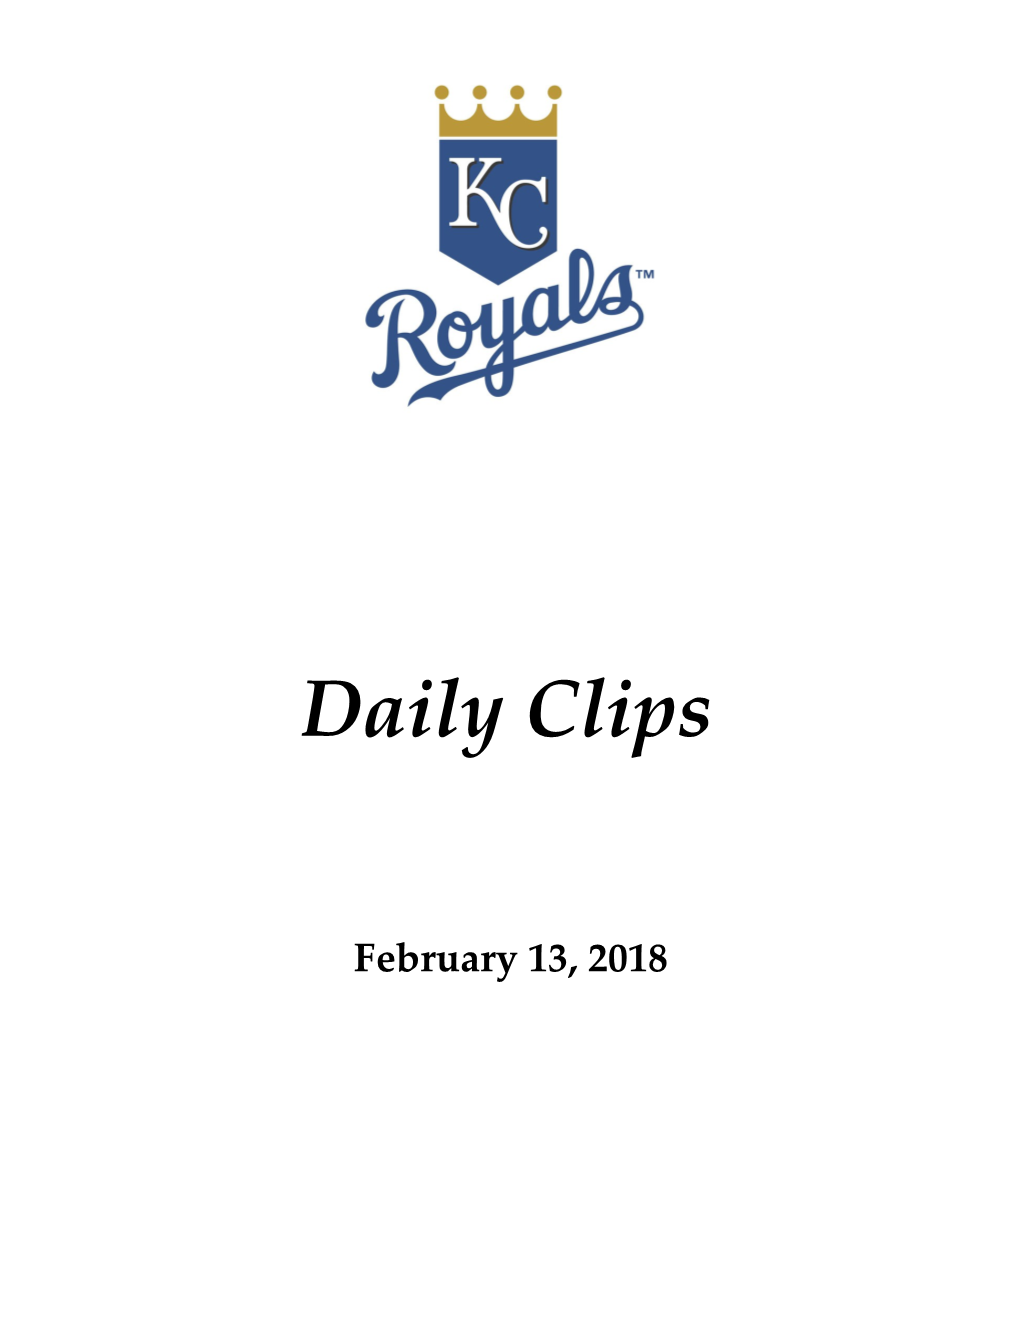 Royals 'Energized' to Build Another Title Team